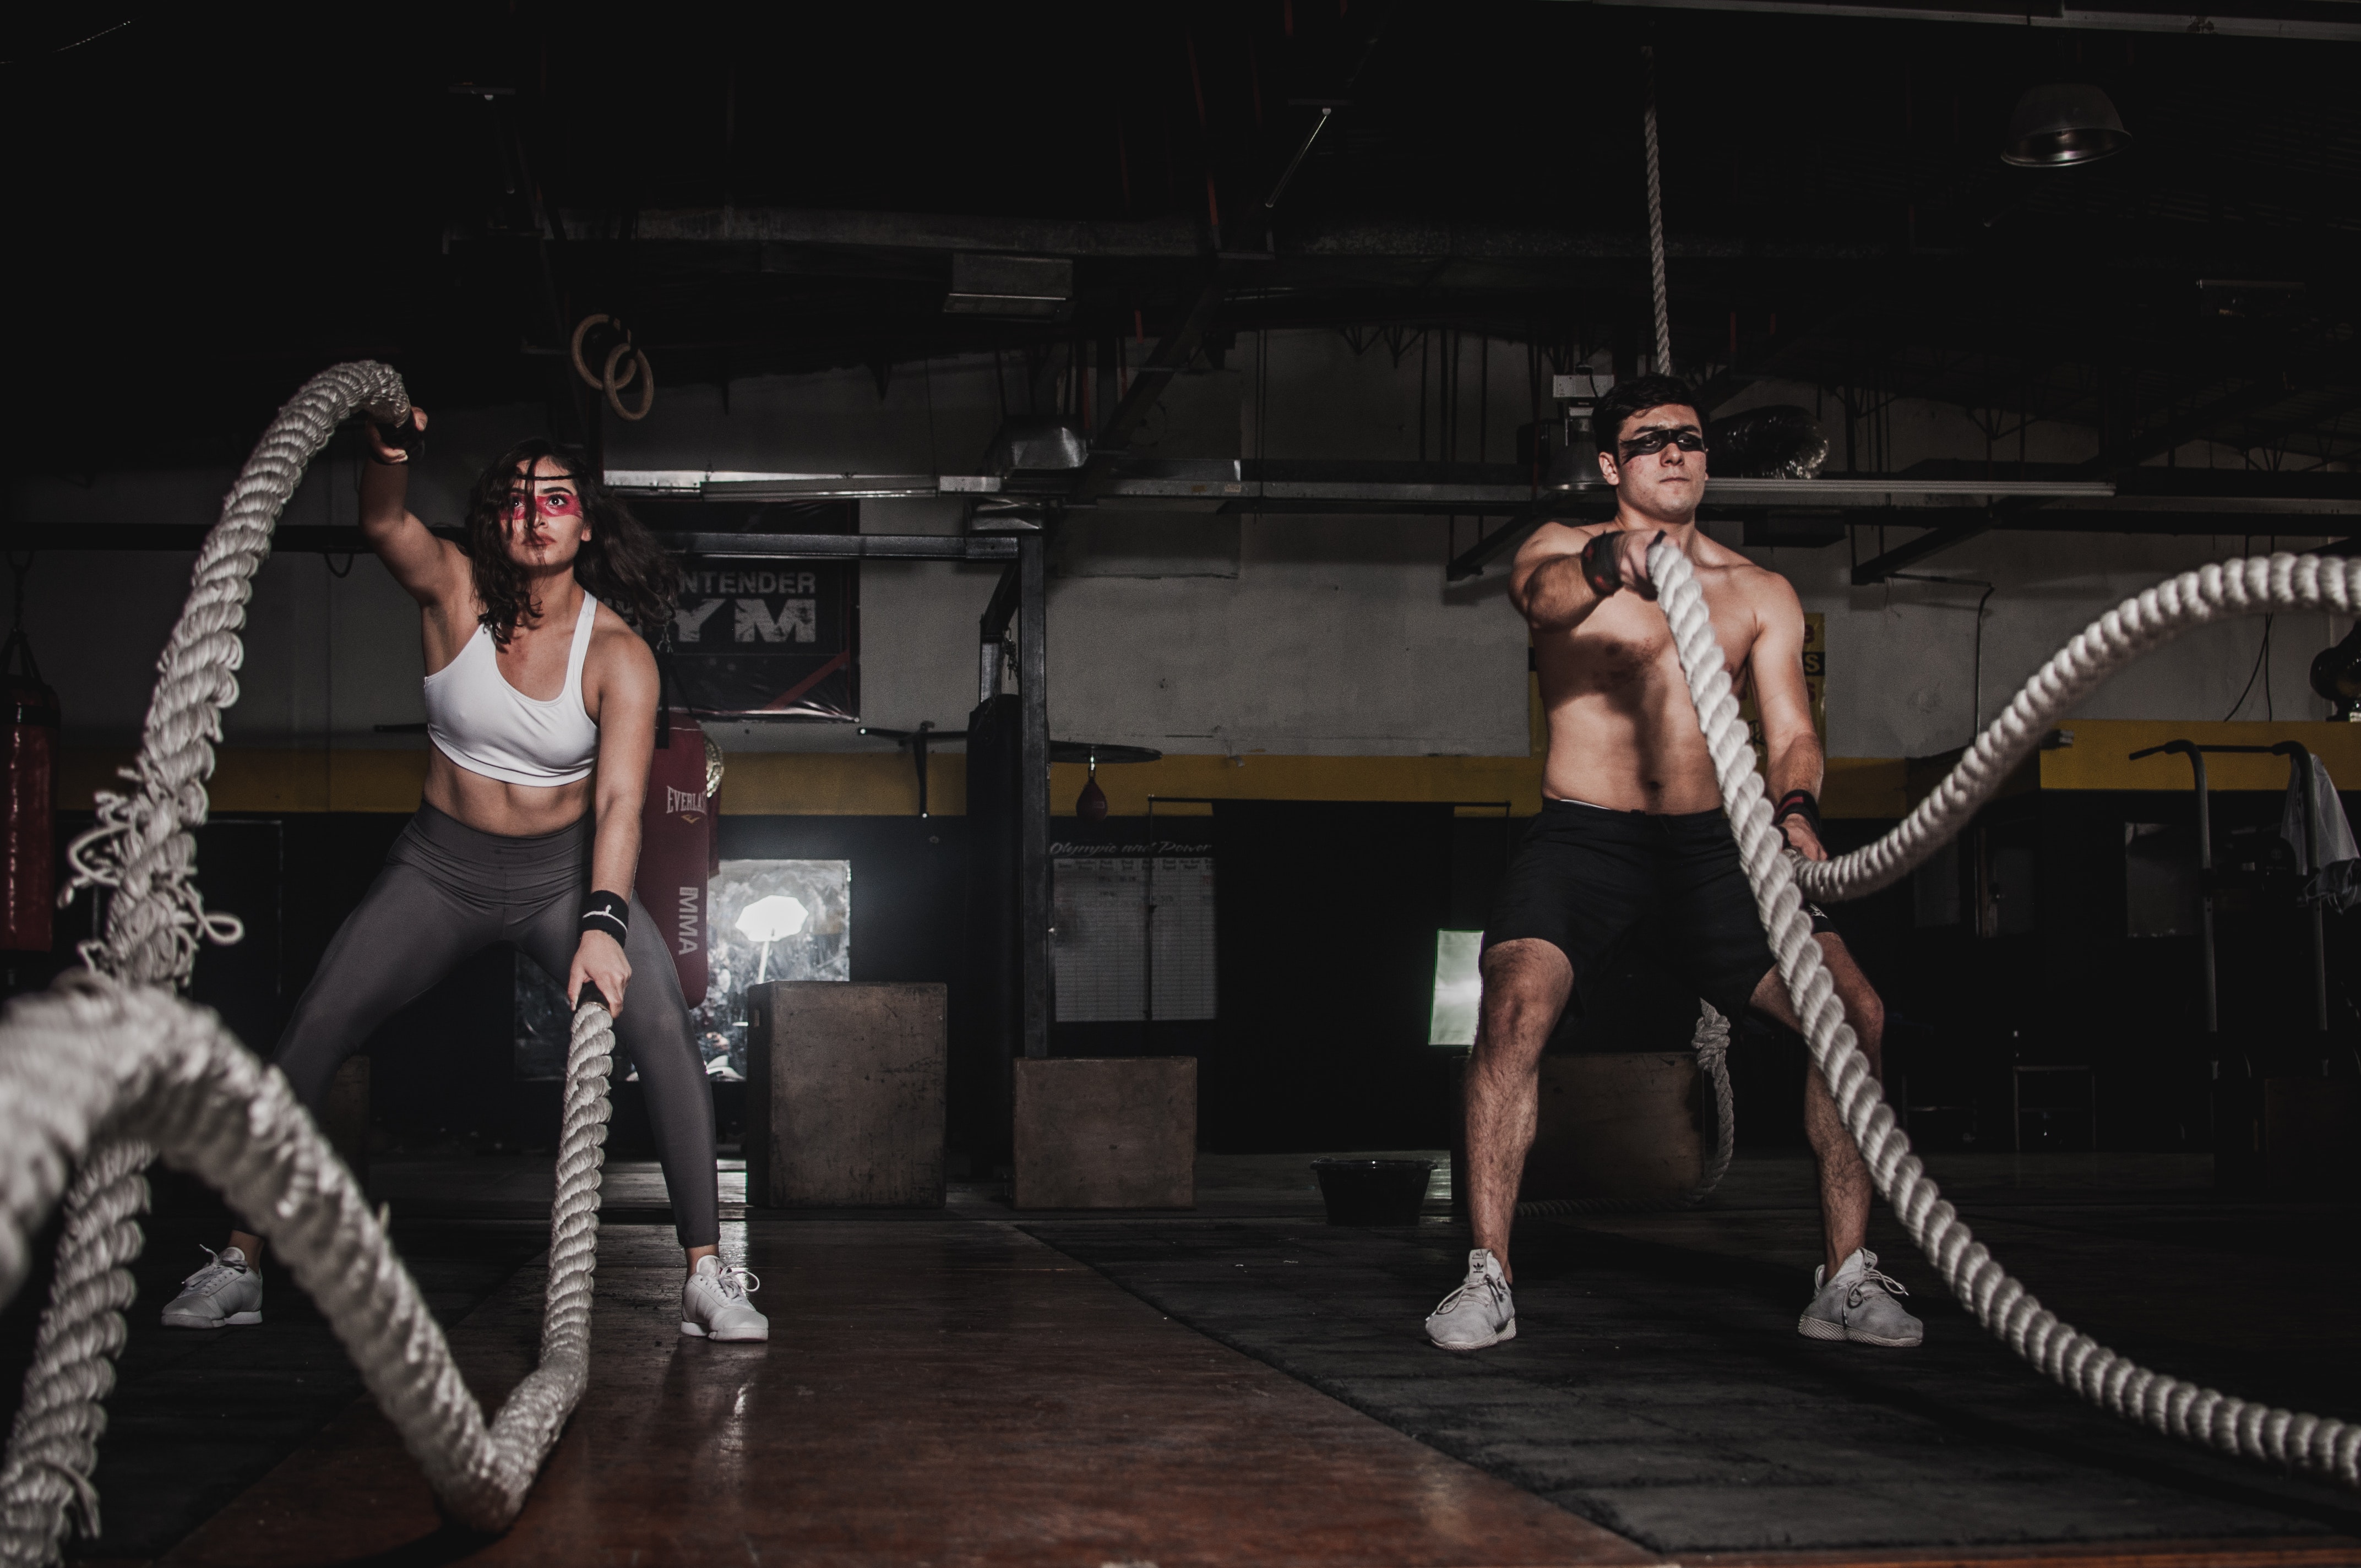 Man and woman get total body fitness and renewal with battle ropes